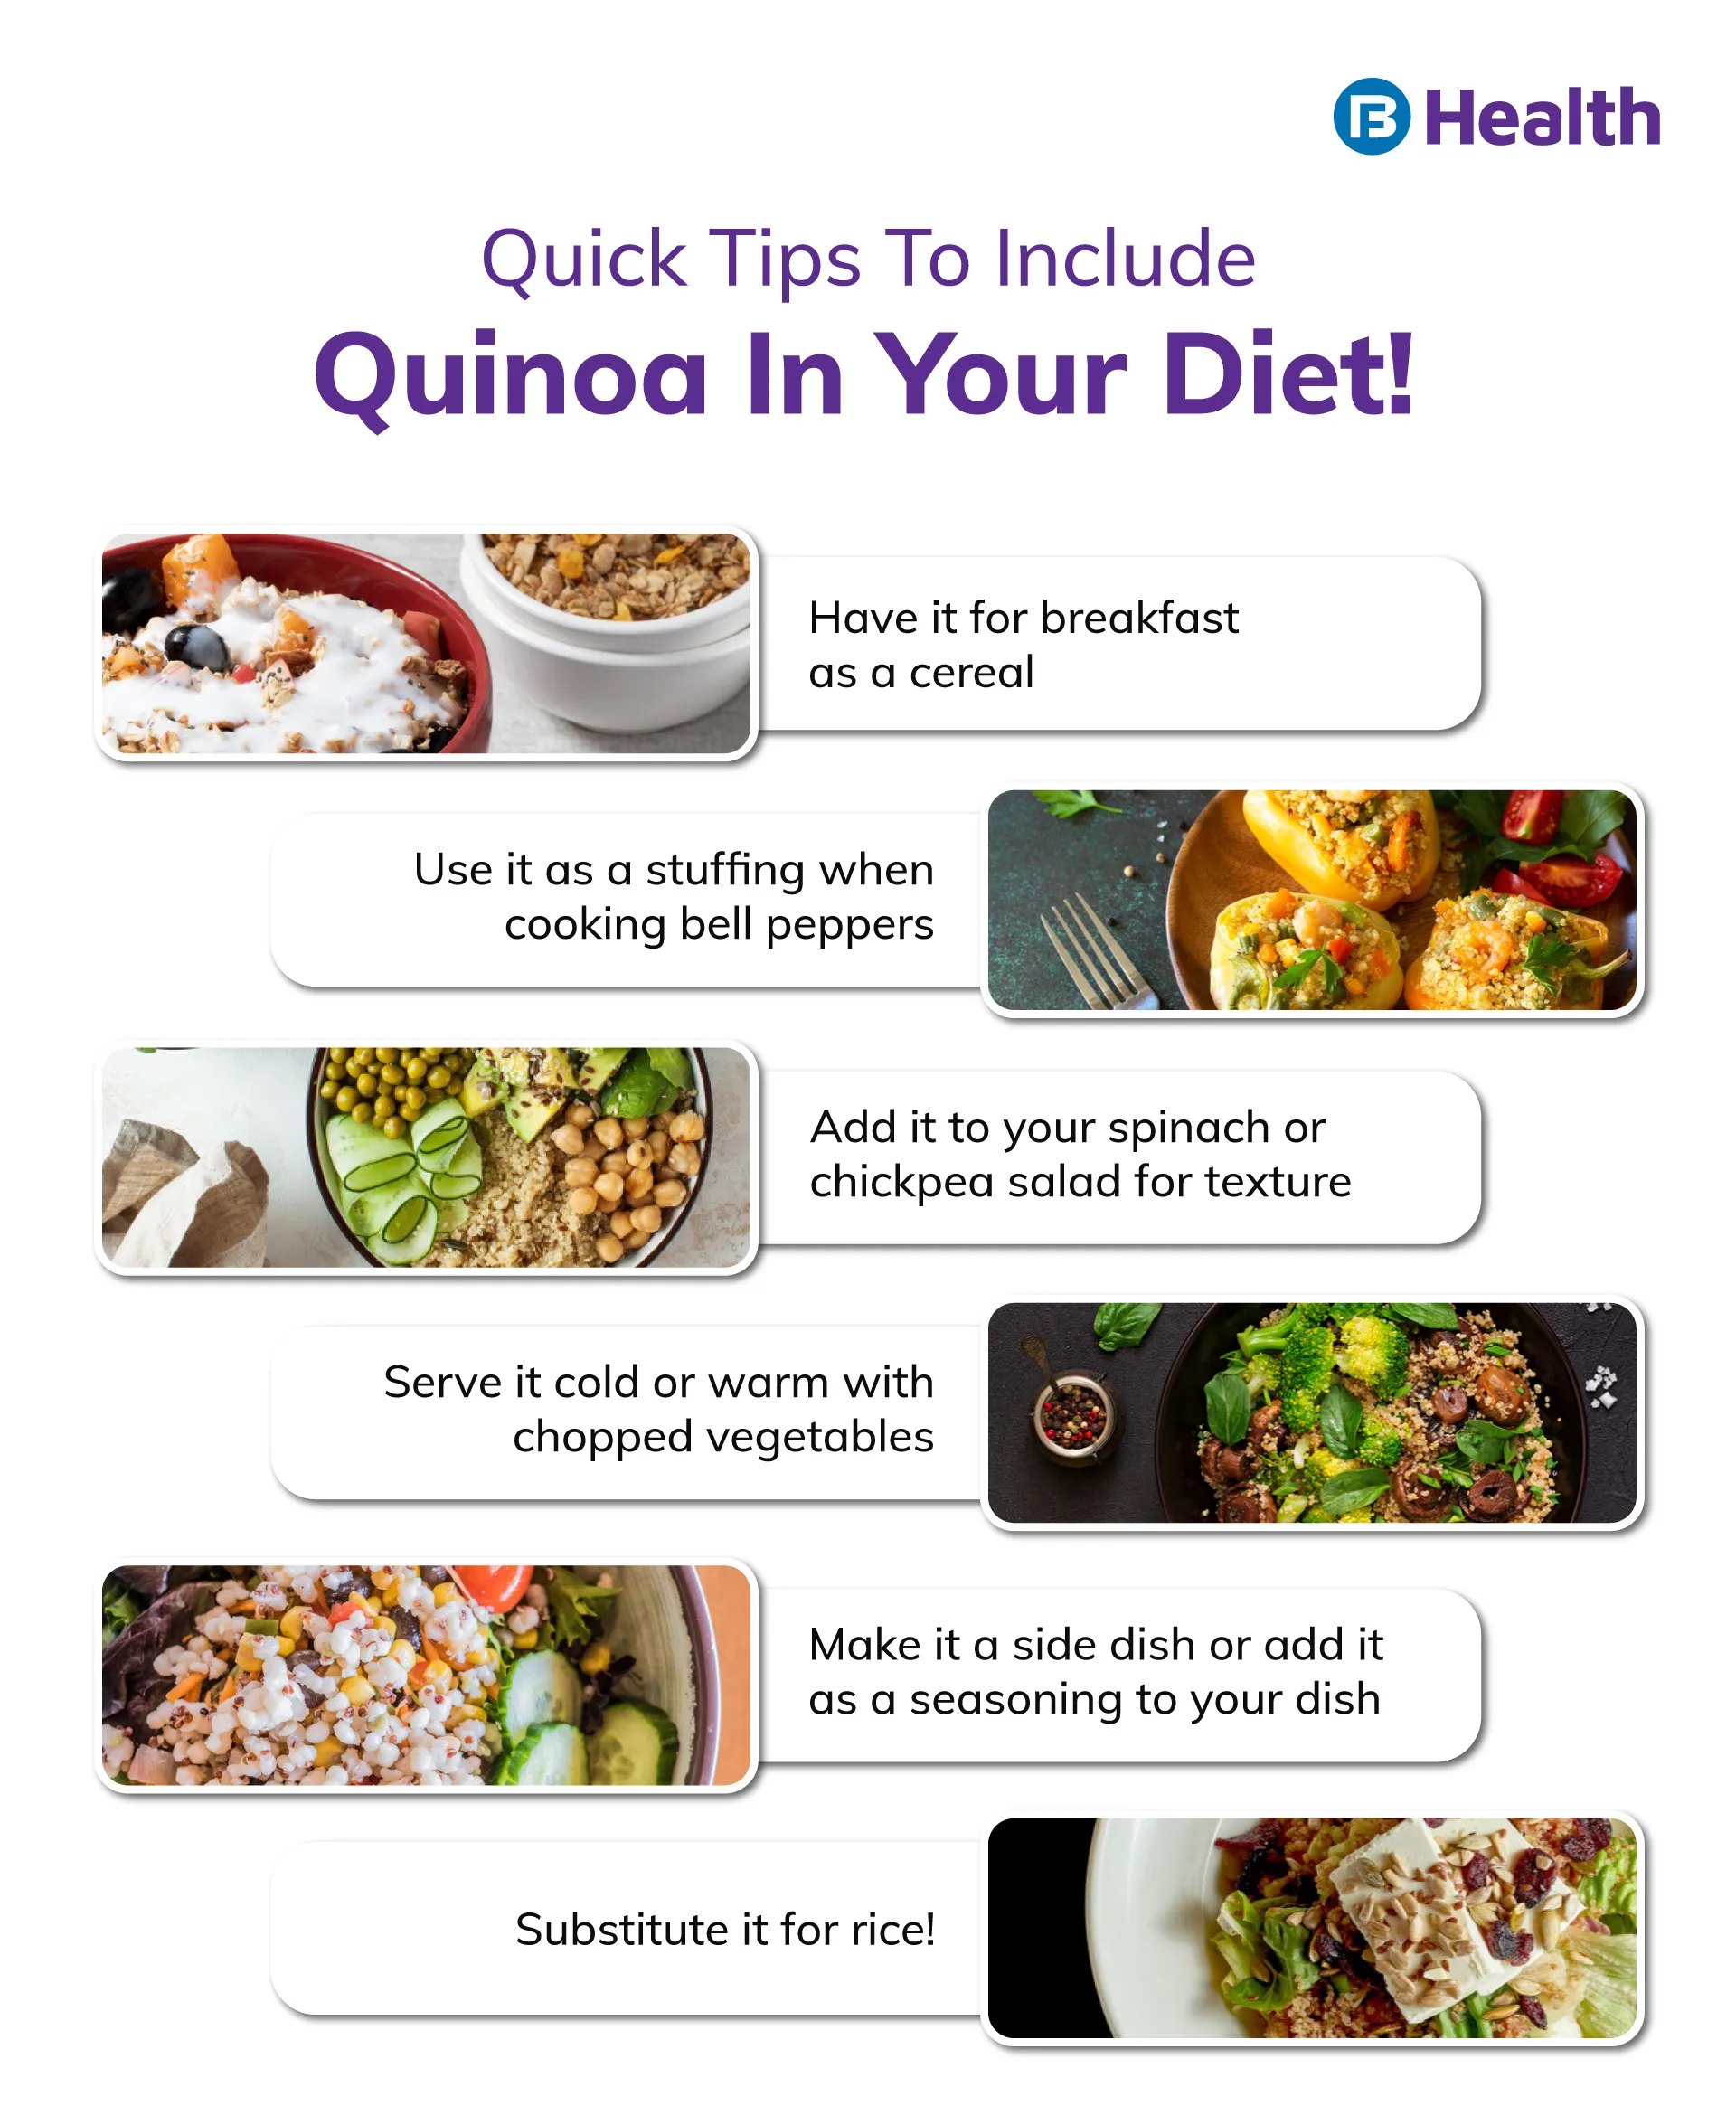 Tips to include Quinoa in diet